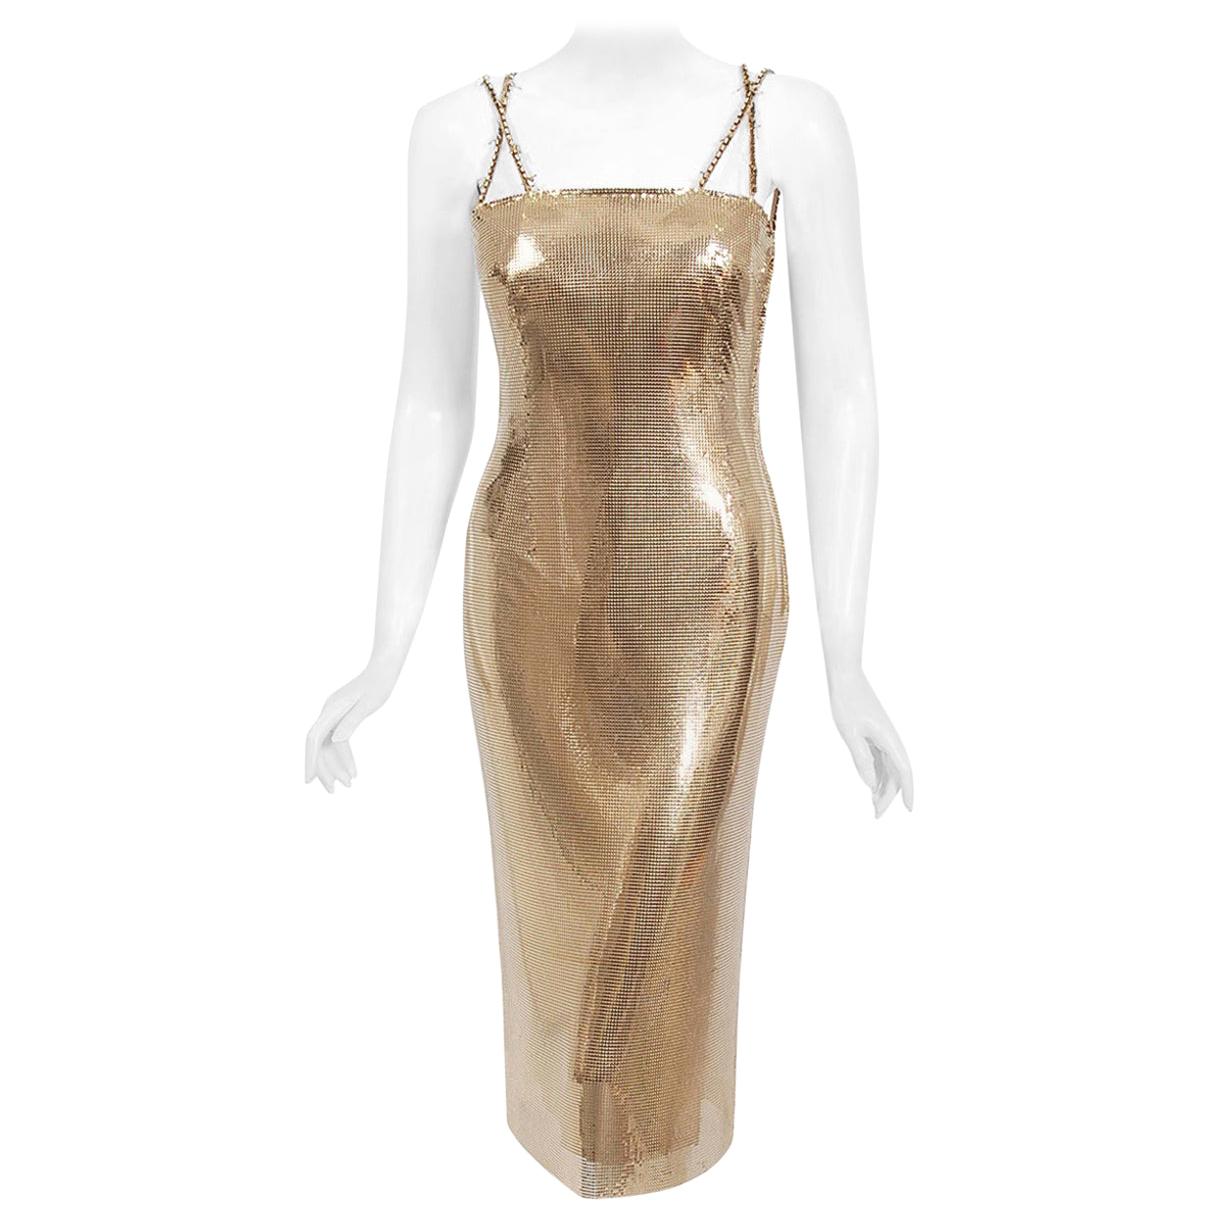 Vintage 1998 Gianni Versace Couture Documented Gold Metal Mesh Hourglass Dress